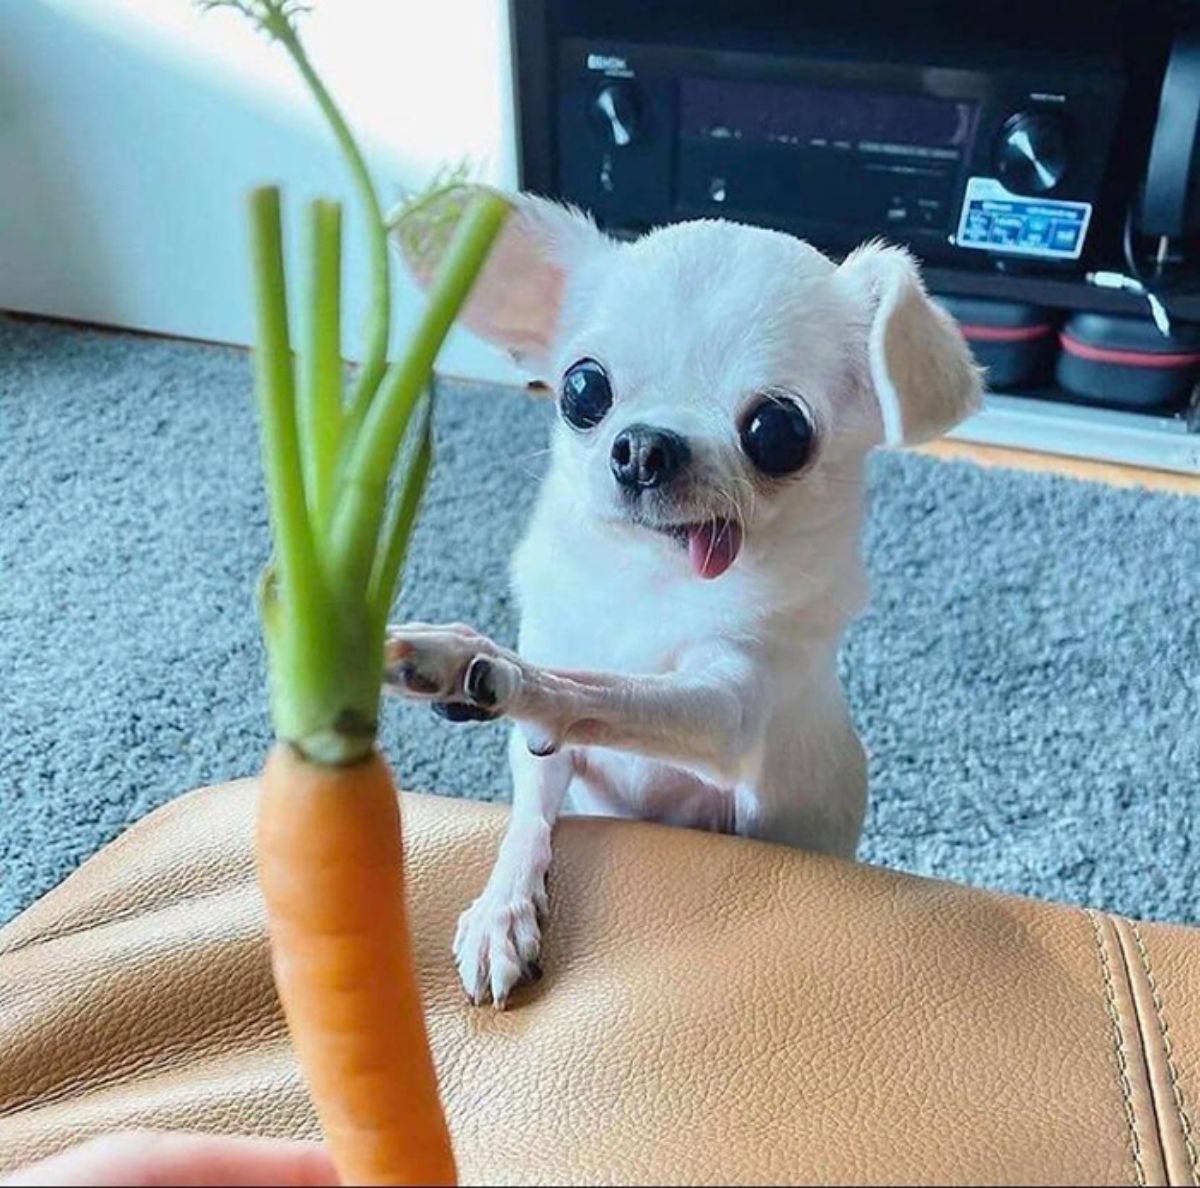 white chihuahua on hind legs and tongue out the side with one front paw reached out to touch a carrot